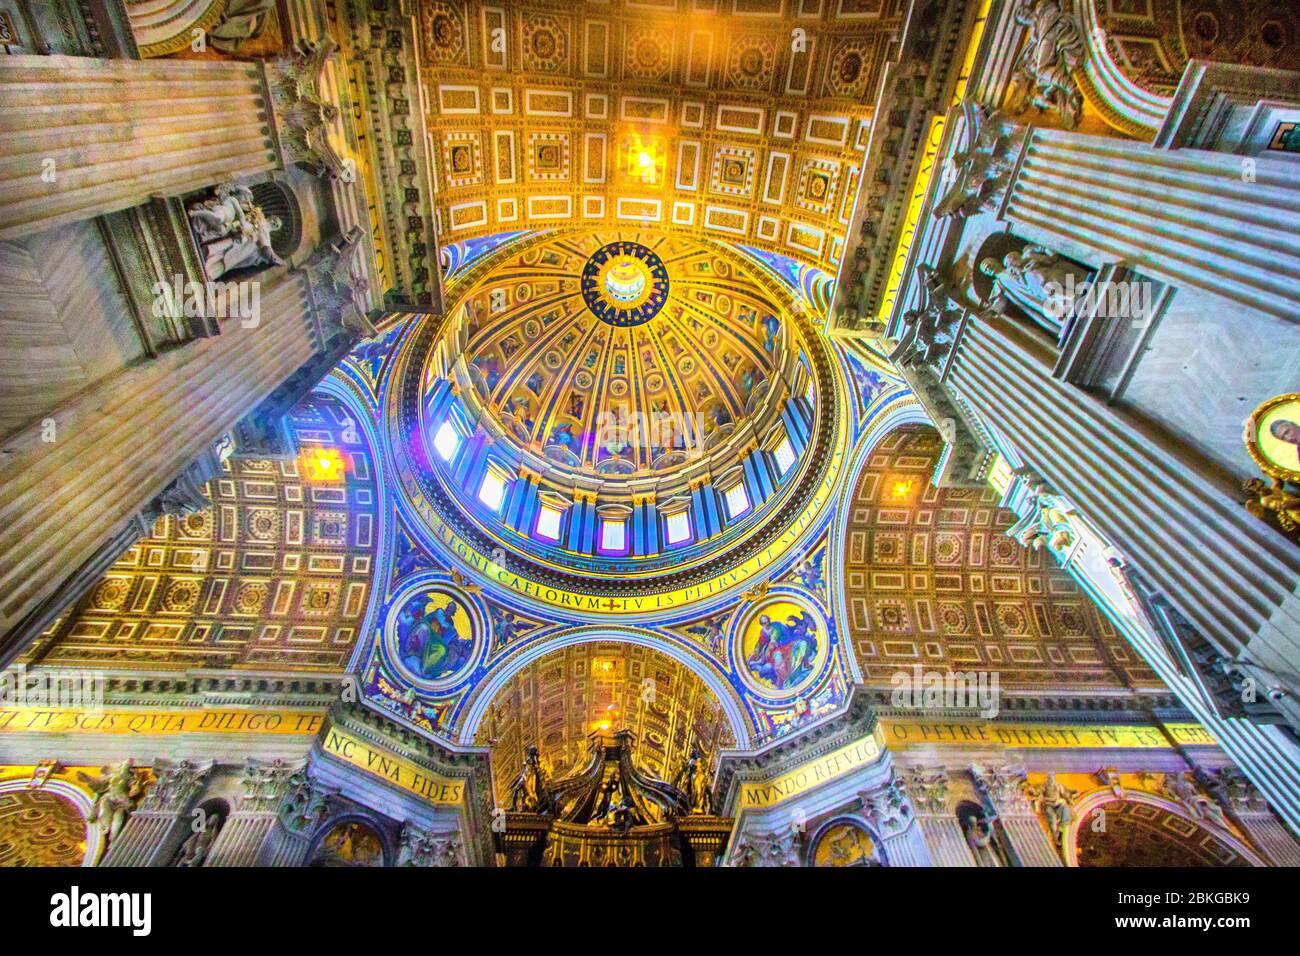 interior of St Peter’s Basilica,catholic shrines,the tomb of St Peter,splendid church,St. Peter’s Cathedral in Rome,vatican,italy, Stock Photo